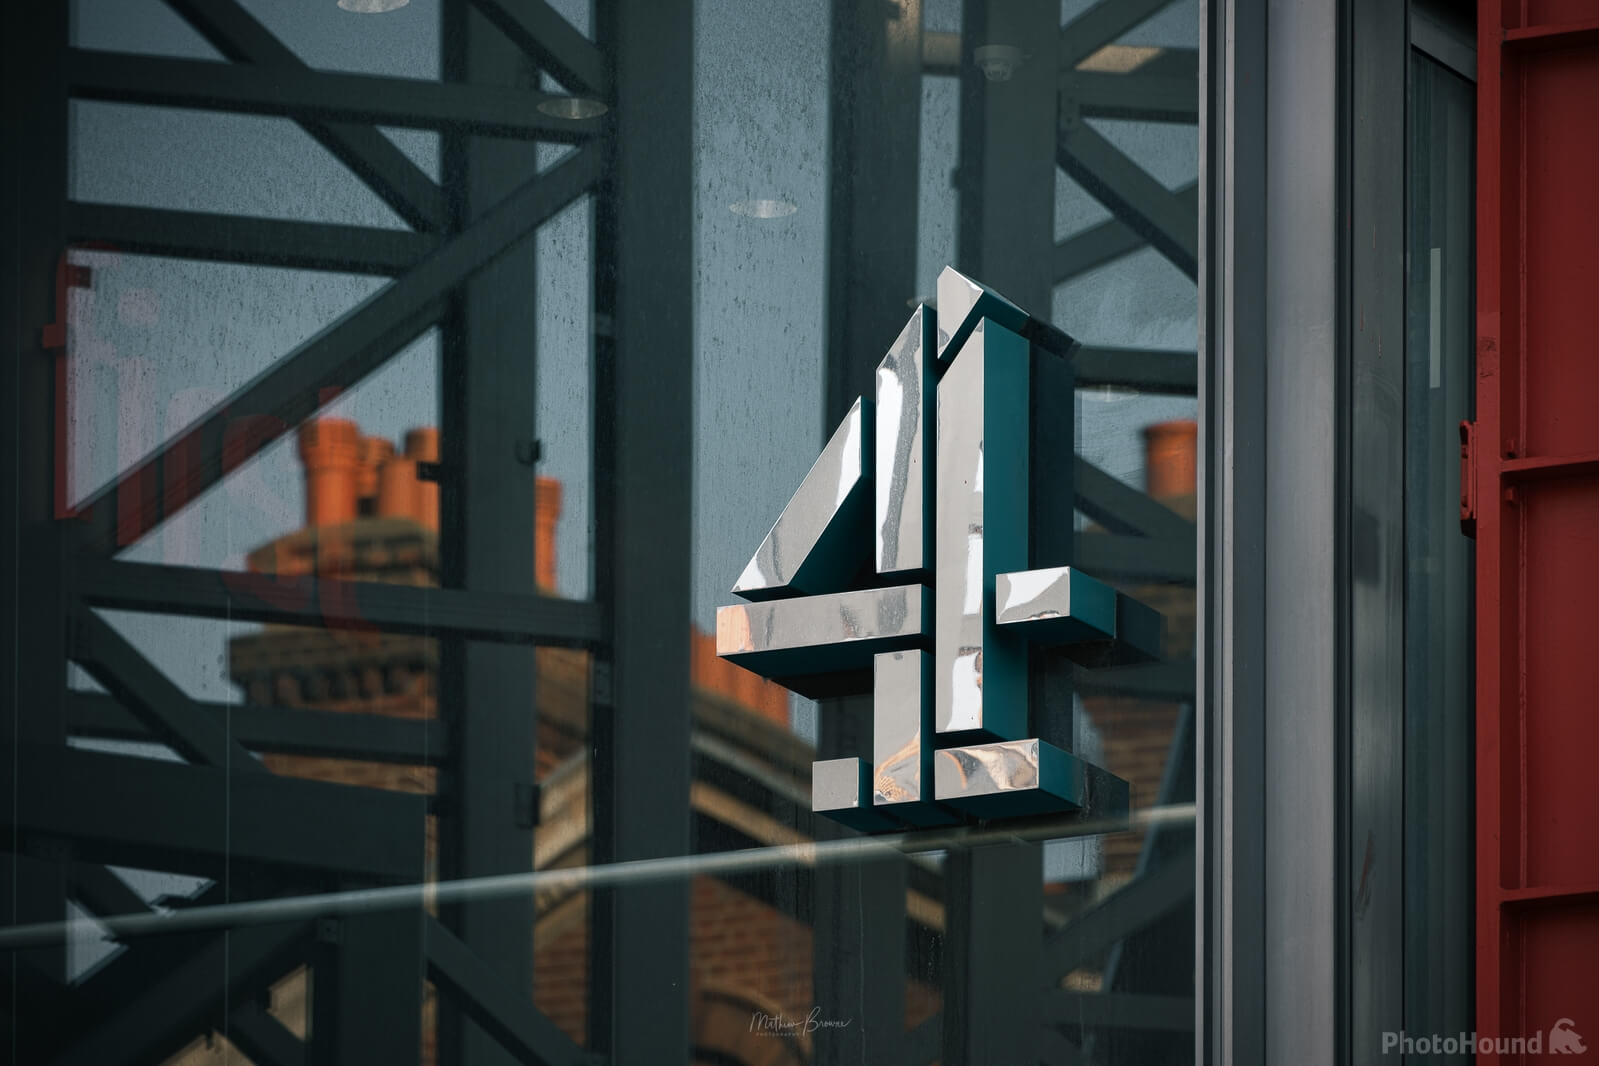 Image of Channel 4 HQ by Mathew Browne